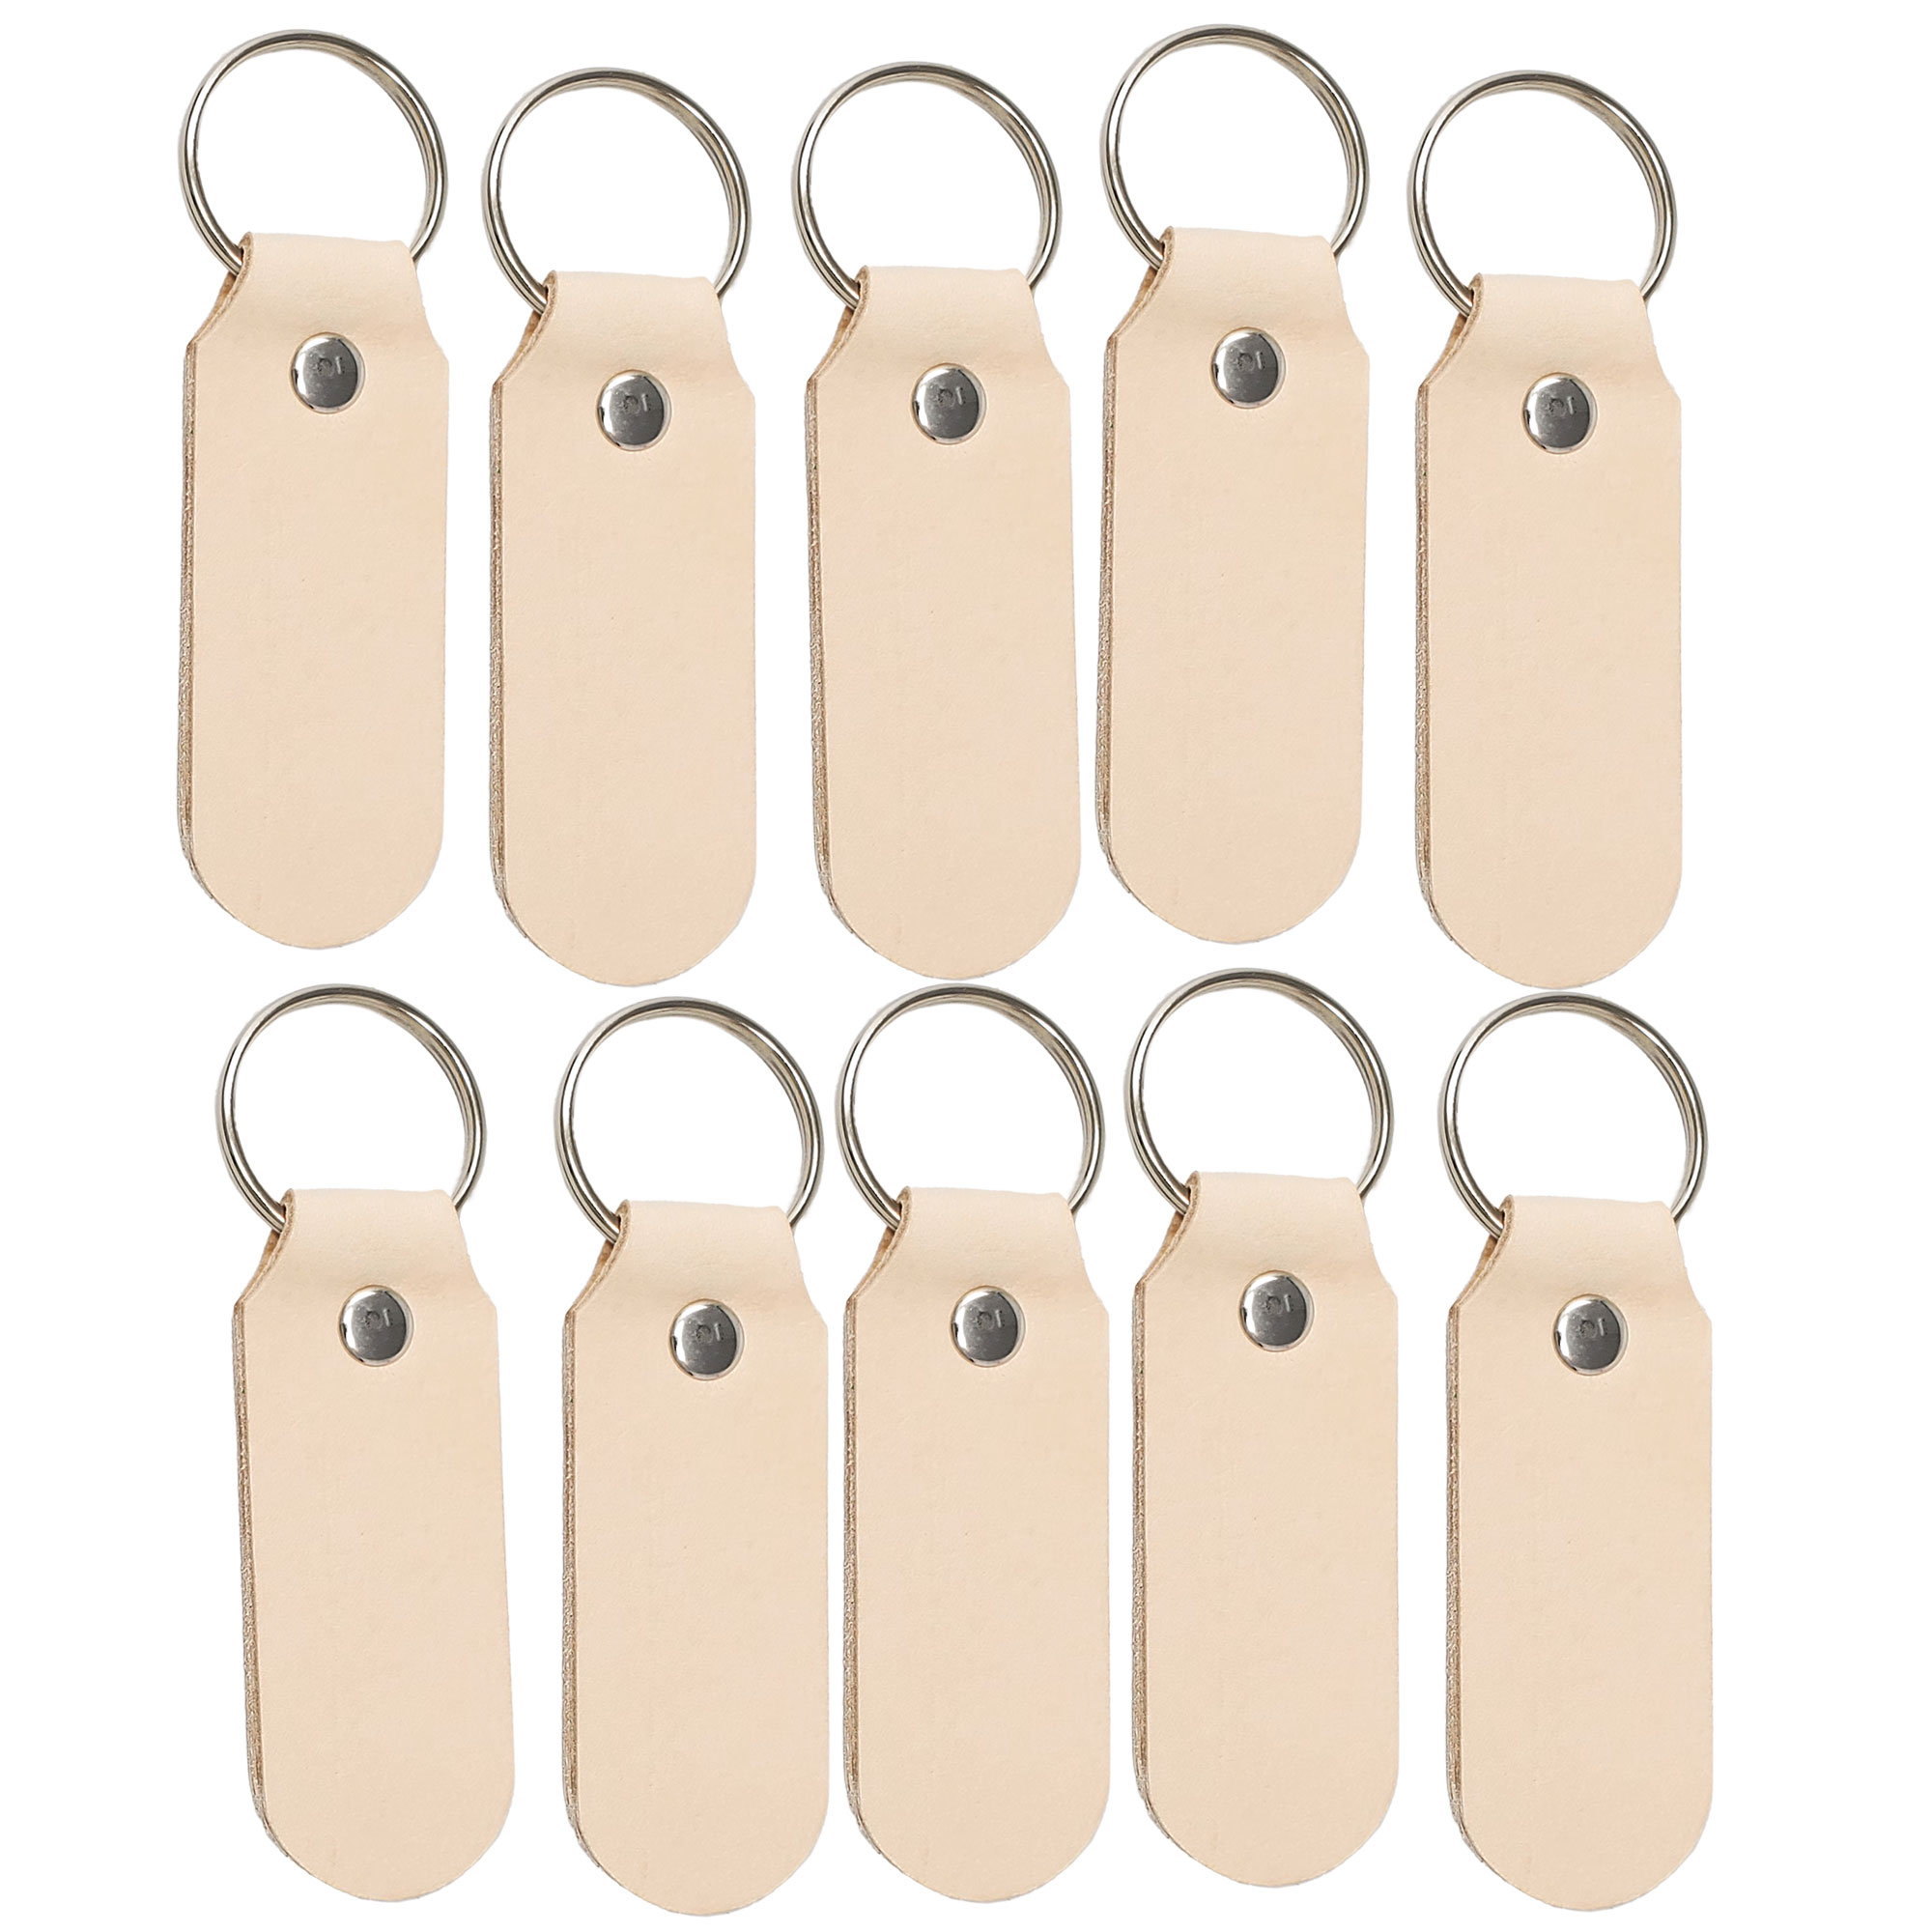 10 Packs Full Grain Blank Leather Keyrings-Hot Foil Stamping, Laser  Engraving-Promotional business gifts – Pitka Leather